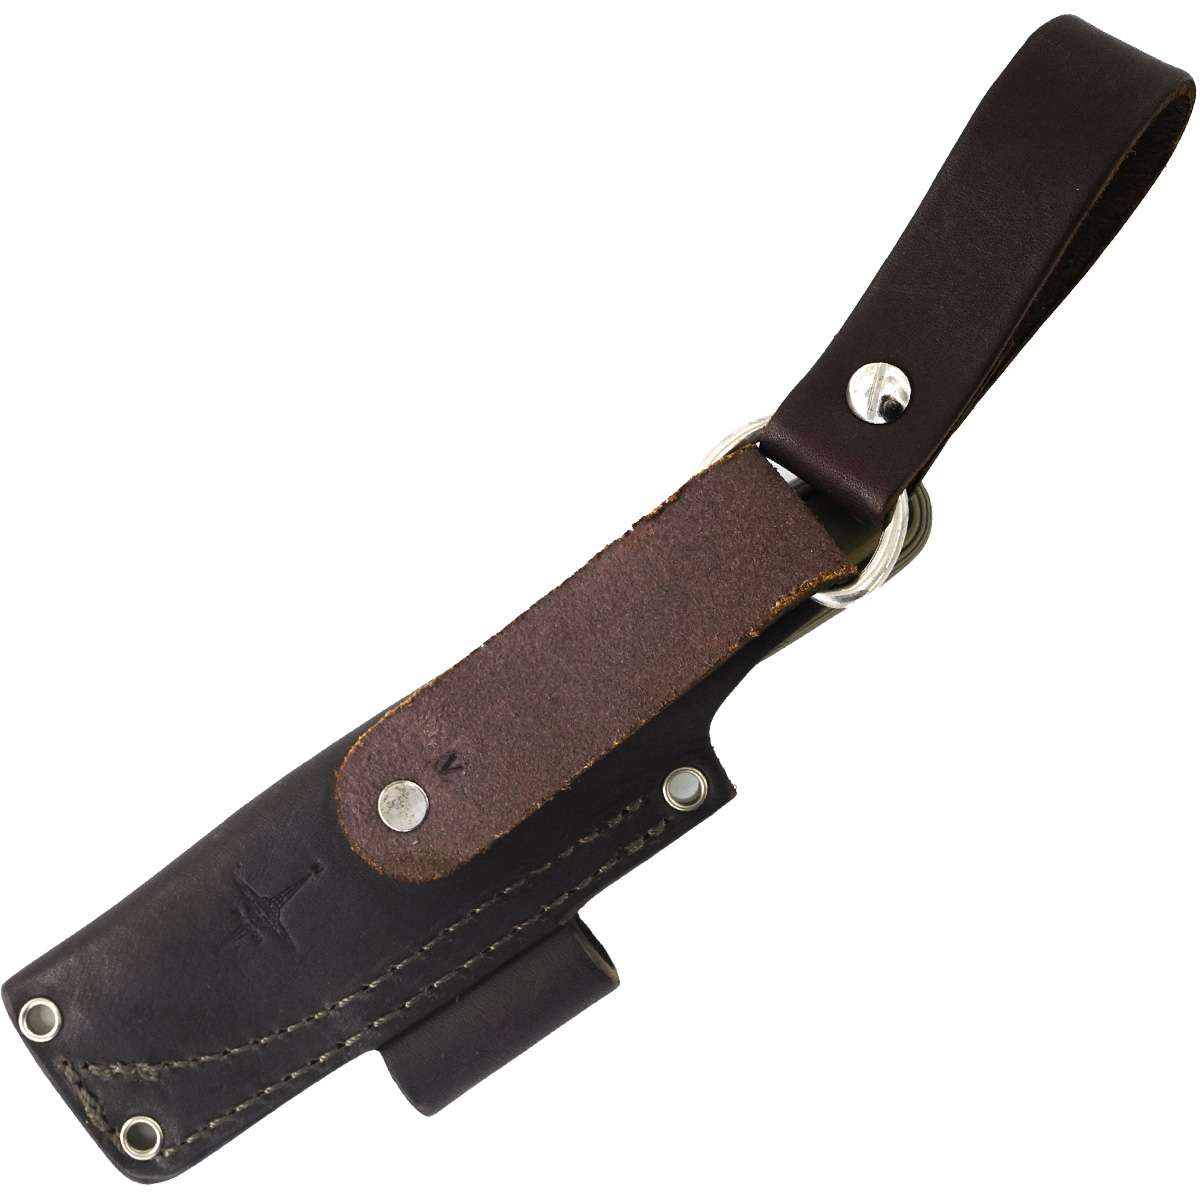 LT Wright Bushbaby Knife - Camo G10 Matte with Brown Leather Sheath